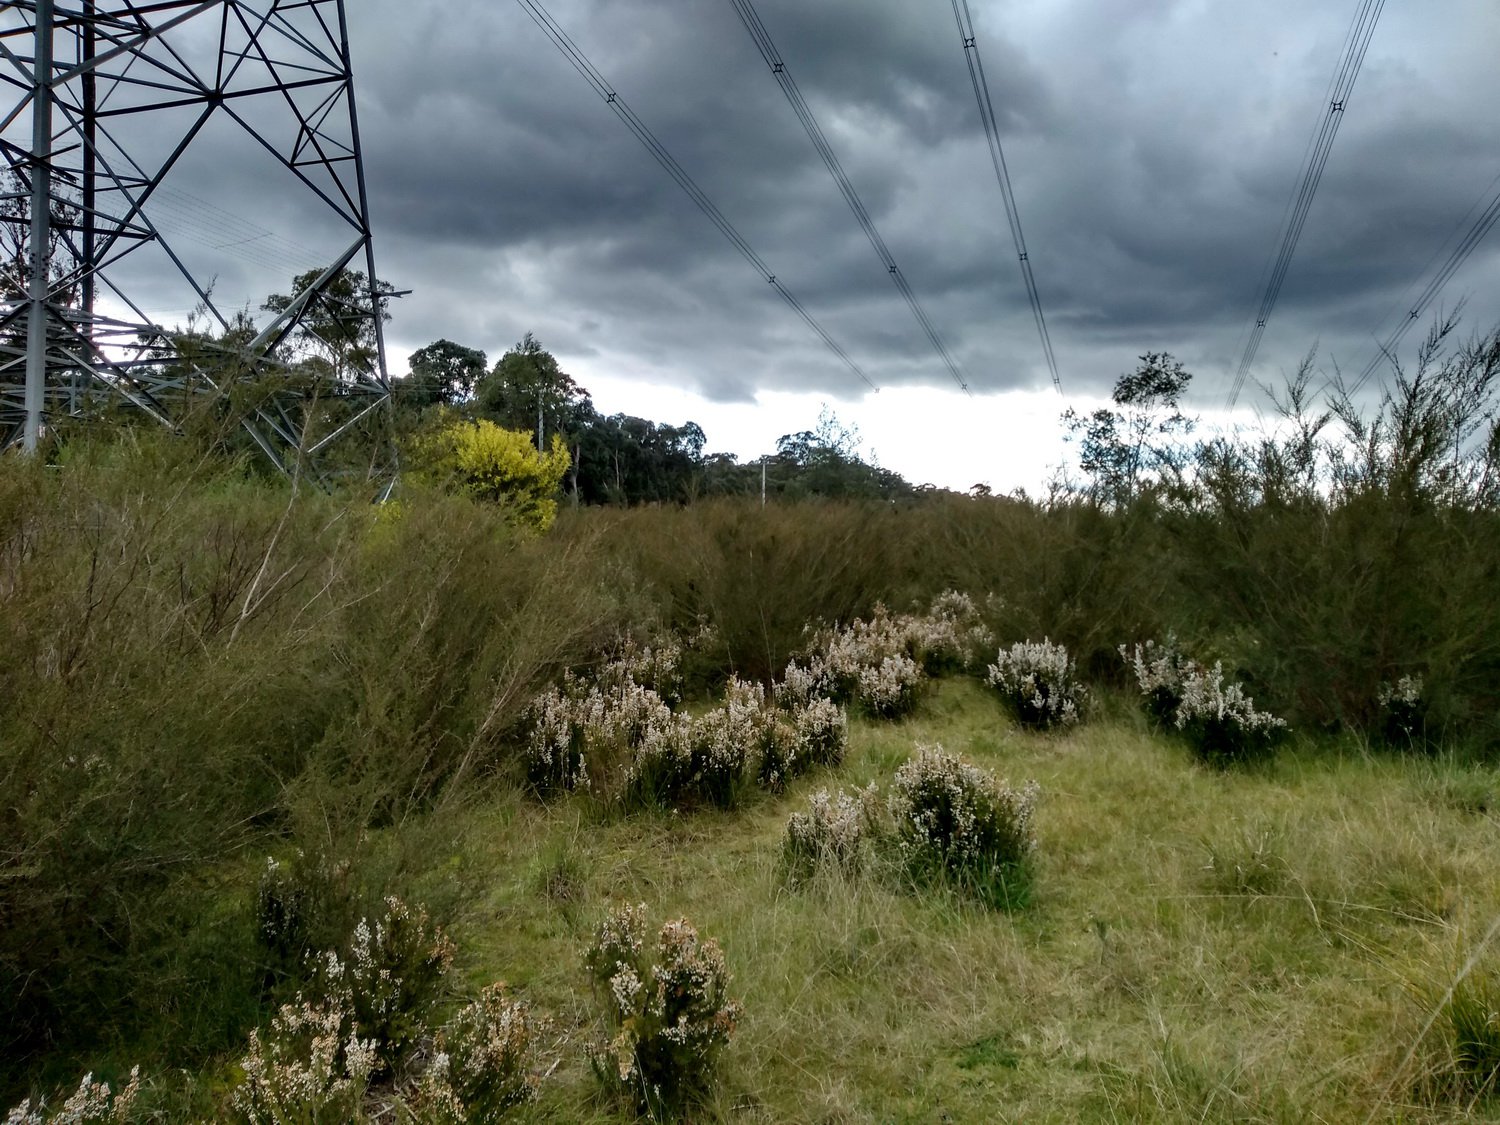 Nature meets technology, power transmission lines hover above the park. Reynolds Road south walk, August 2020.